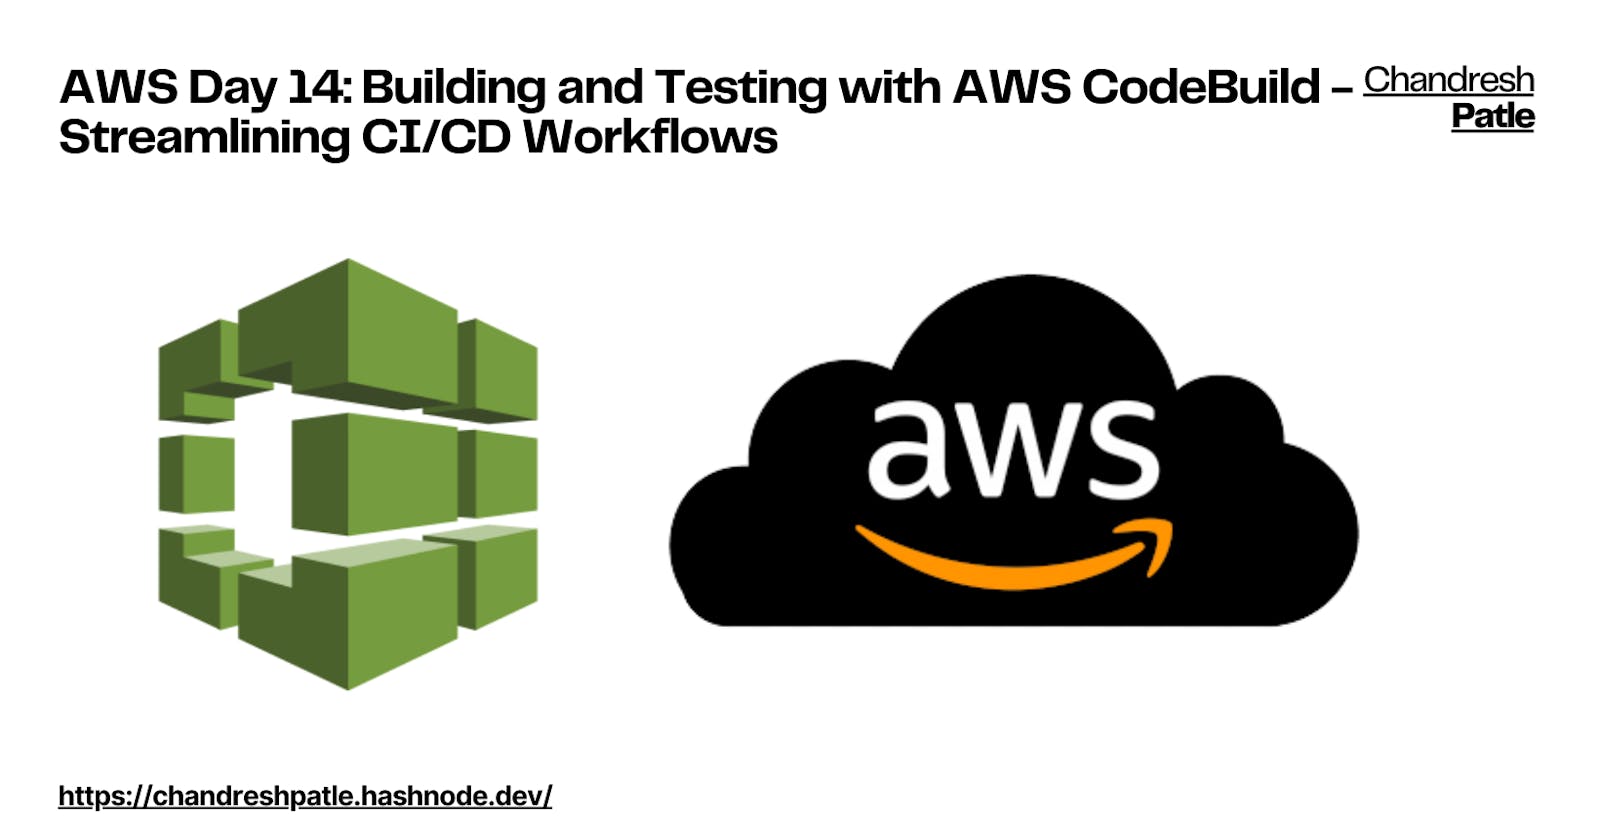 AWS Day 14: Building and Testing with AWS CodeBuild - Streamlining CI/CD Workflows